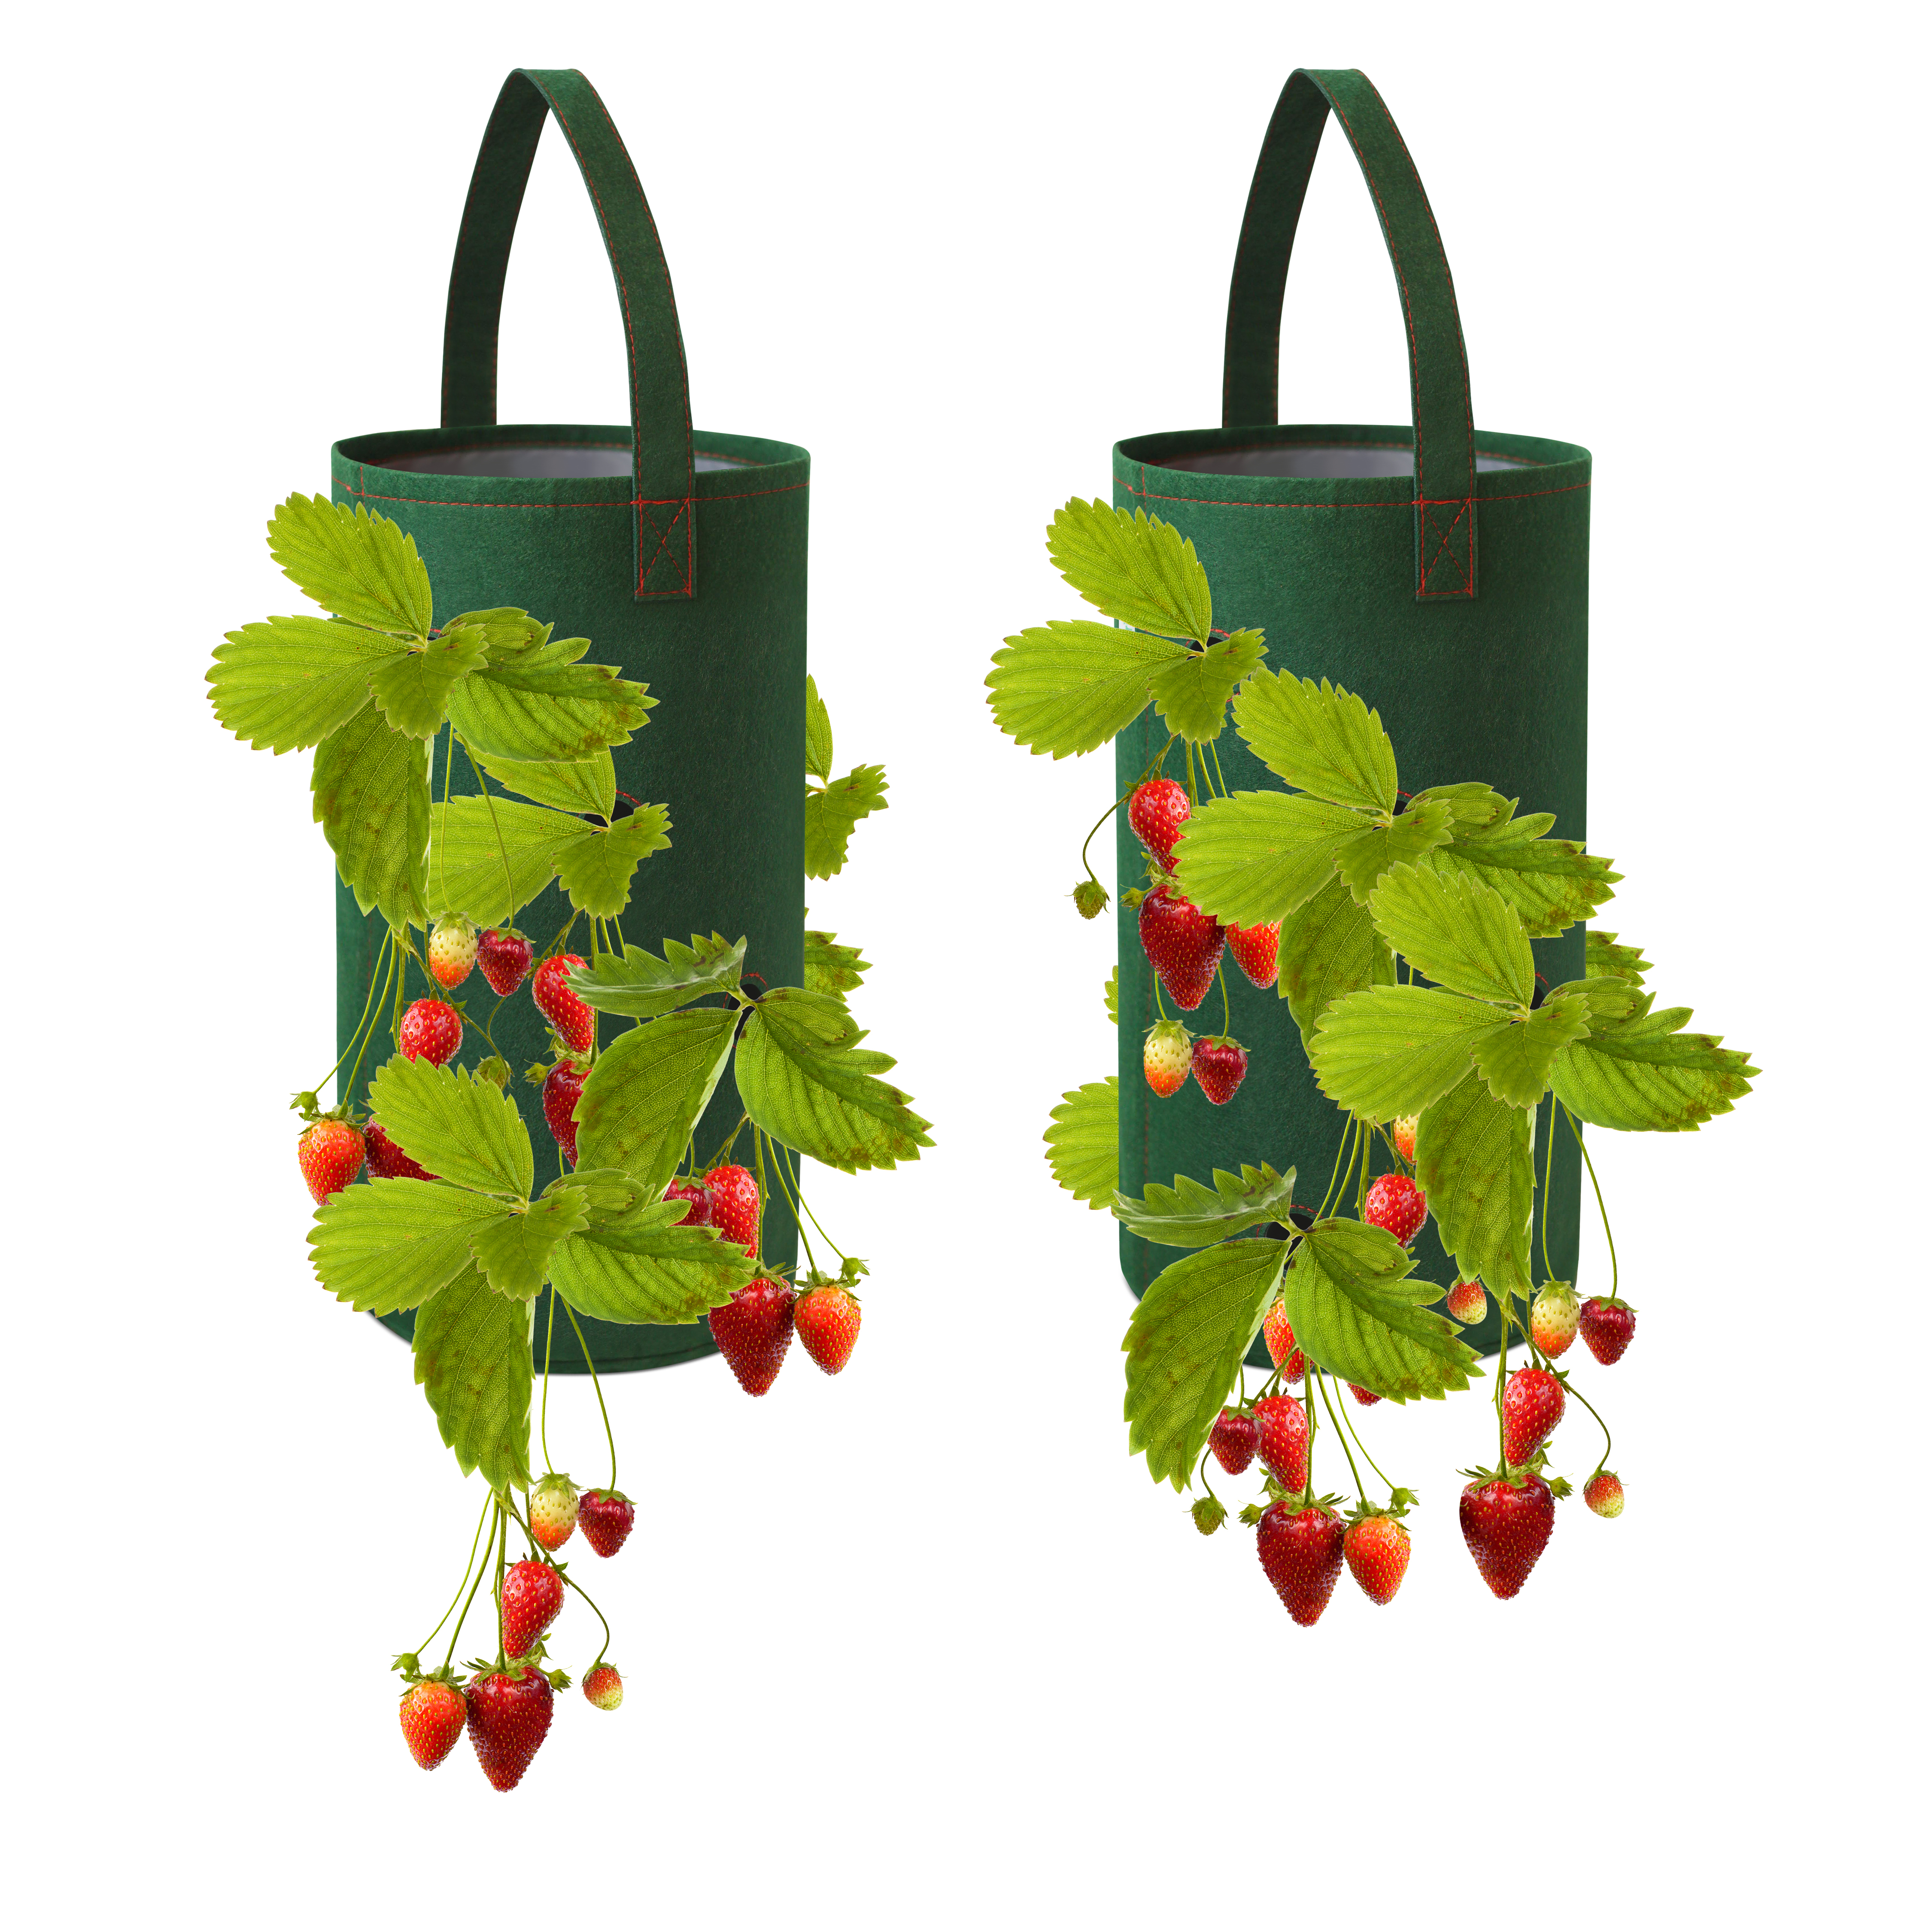 Pri Gardens Hanging Strawberry Planter for Strawberry Bare Root Plants (roots not included) Felt Material 2 pack - image 1 of 6